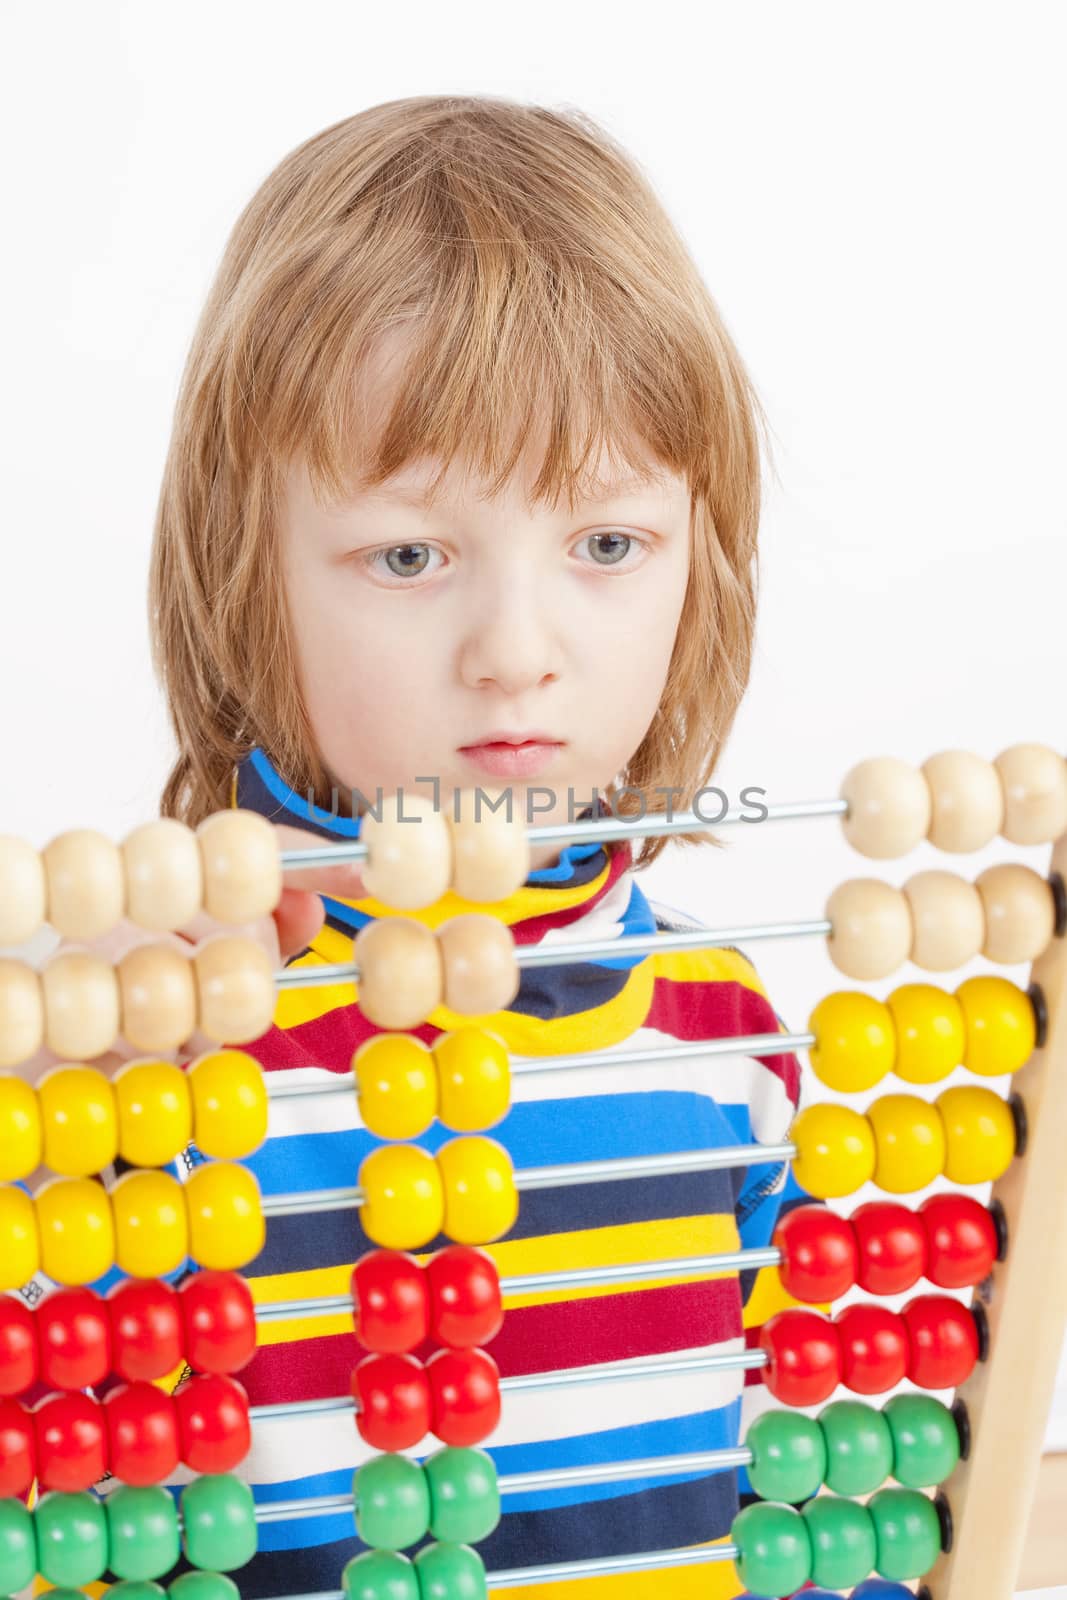 Boy Counting on Colorful Wooden Abacus - Isolated on White